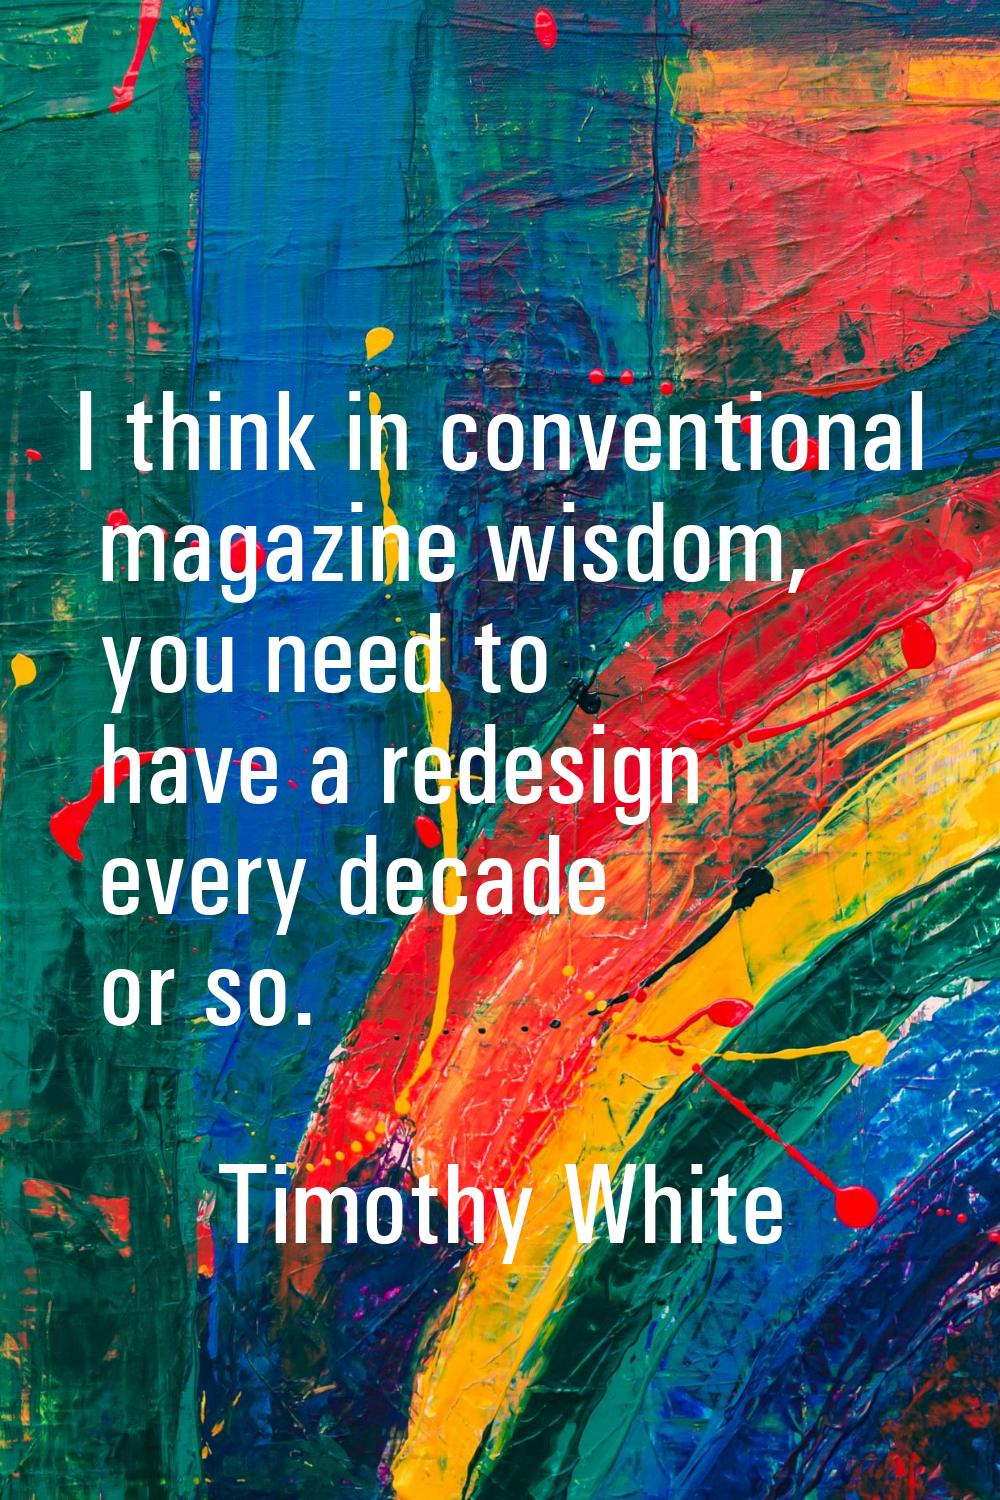 I think in conventional magazine wisdom, you need to have a redesign every decade or so.